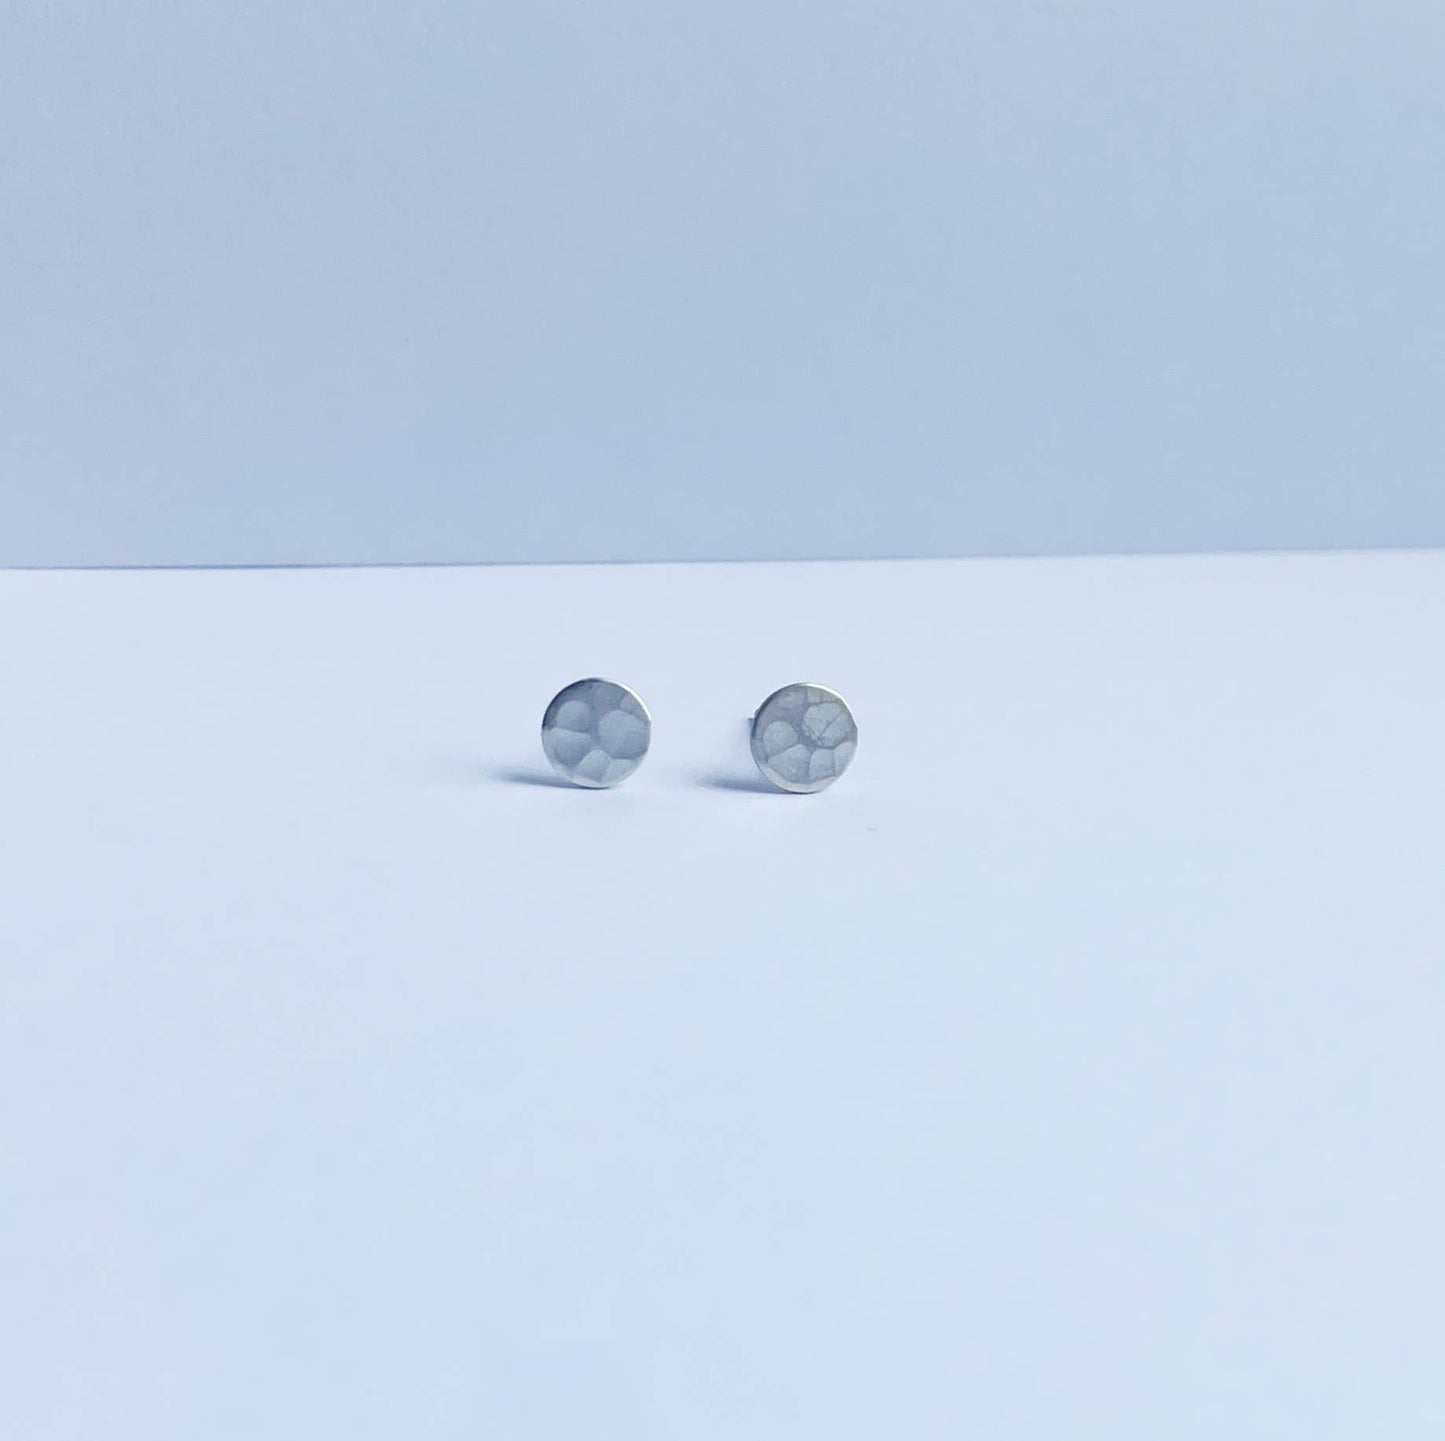 Silver Stud Earrings - Hypoallergenic Textured Circles